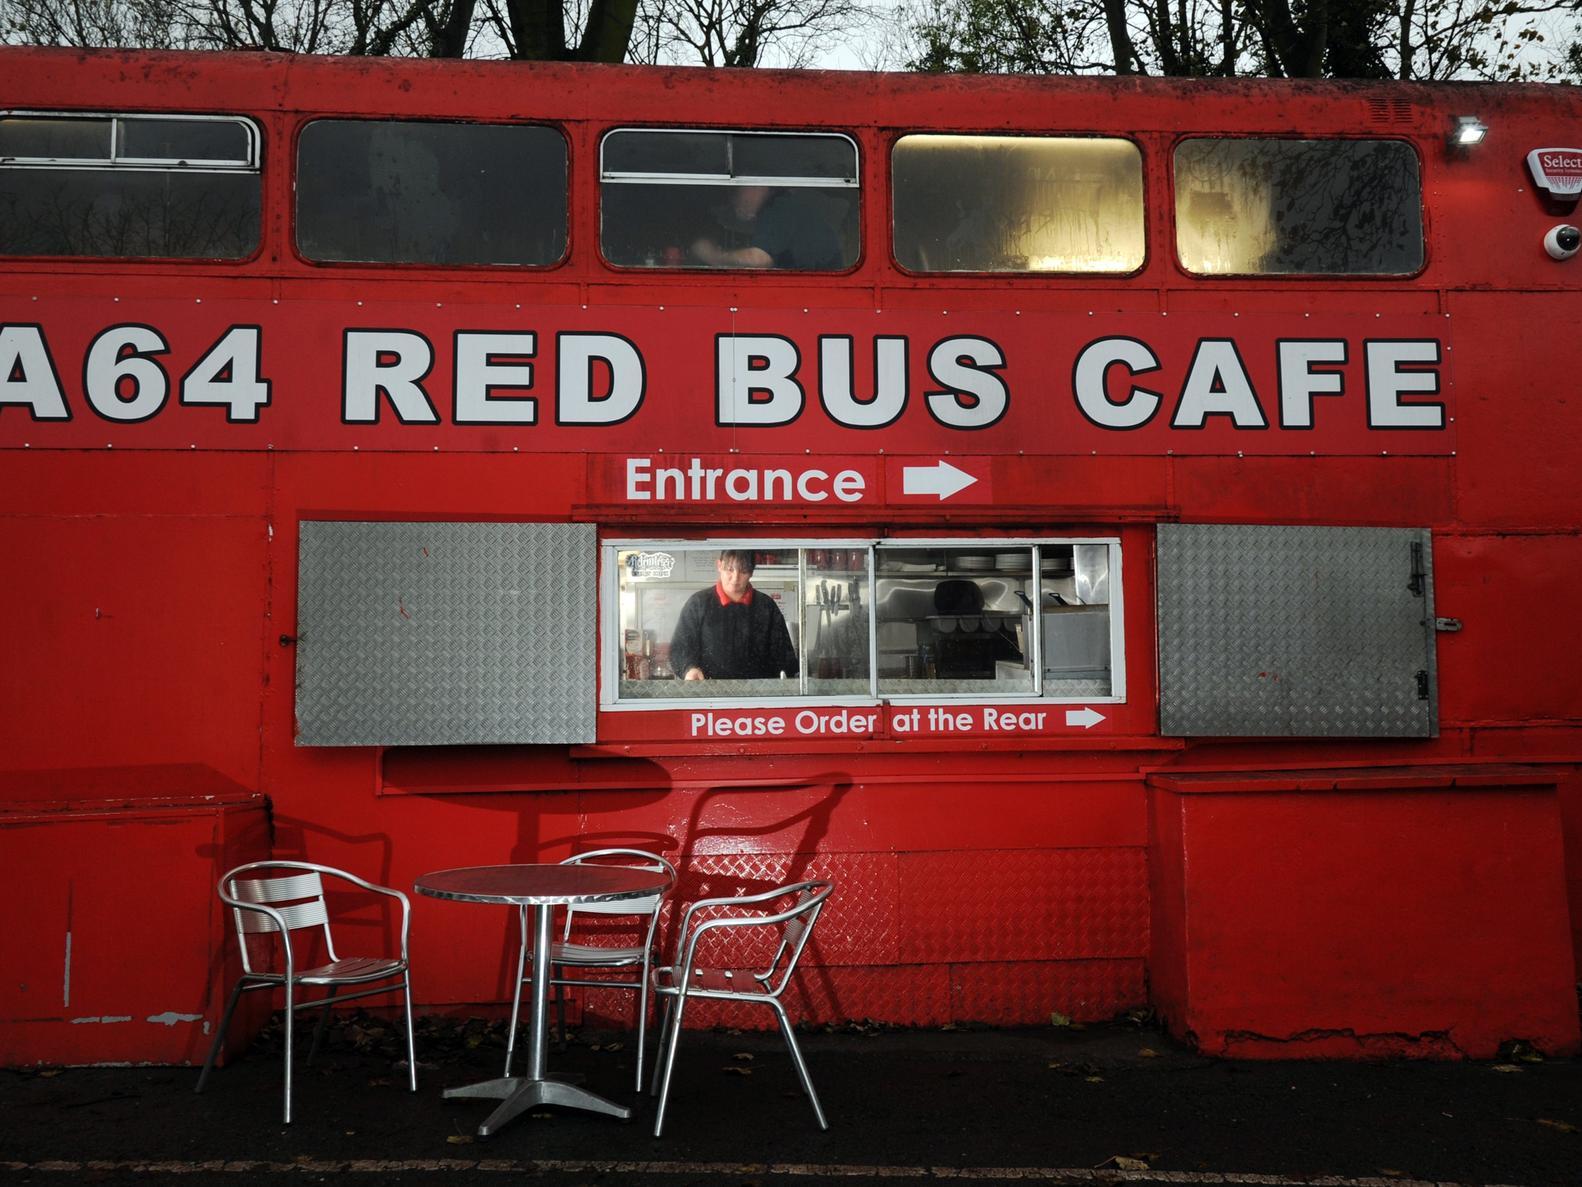 The A64 Red Bus Cafe may now have closed its doors, but the iconic red bus was a long beloved haunt for a bite to eat on the way down to the coast.